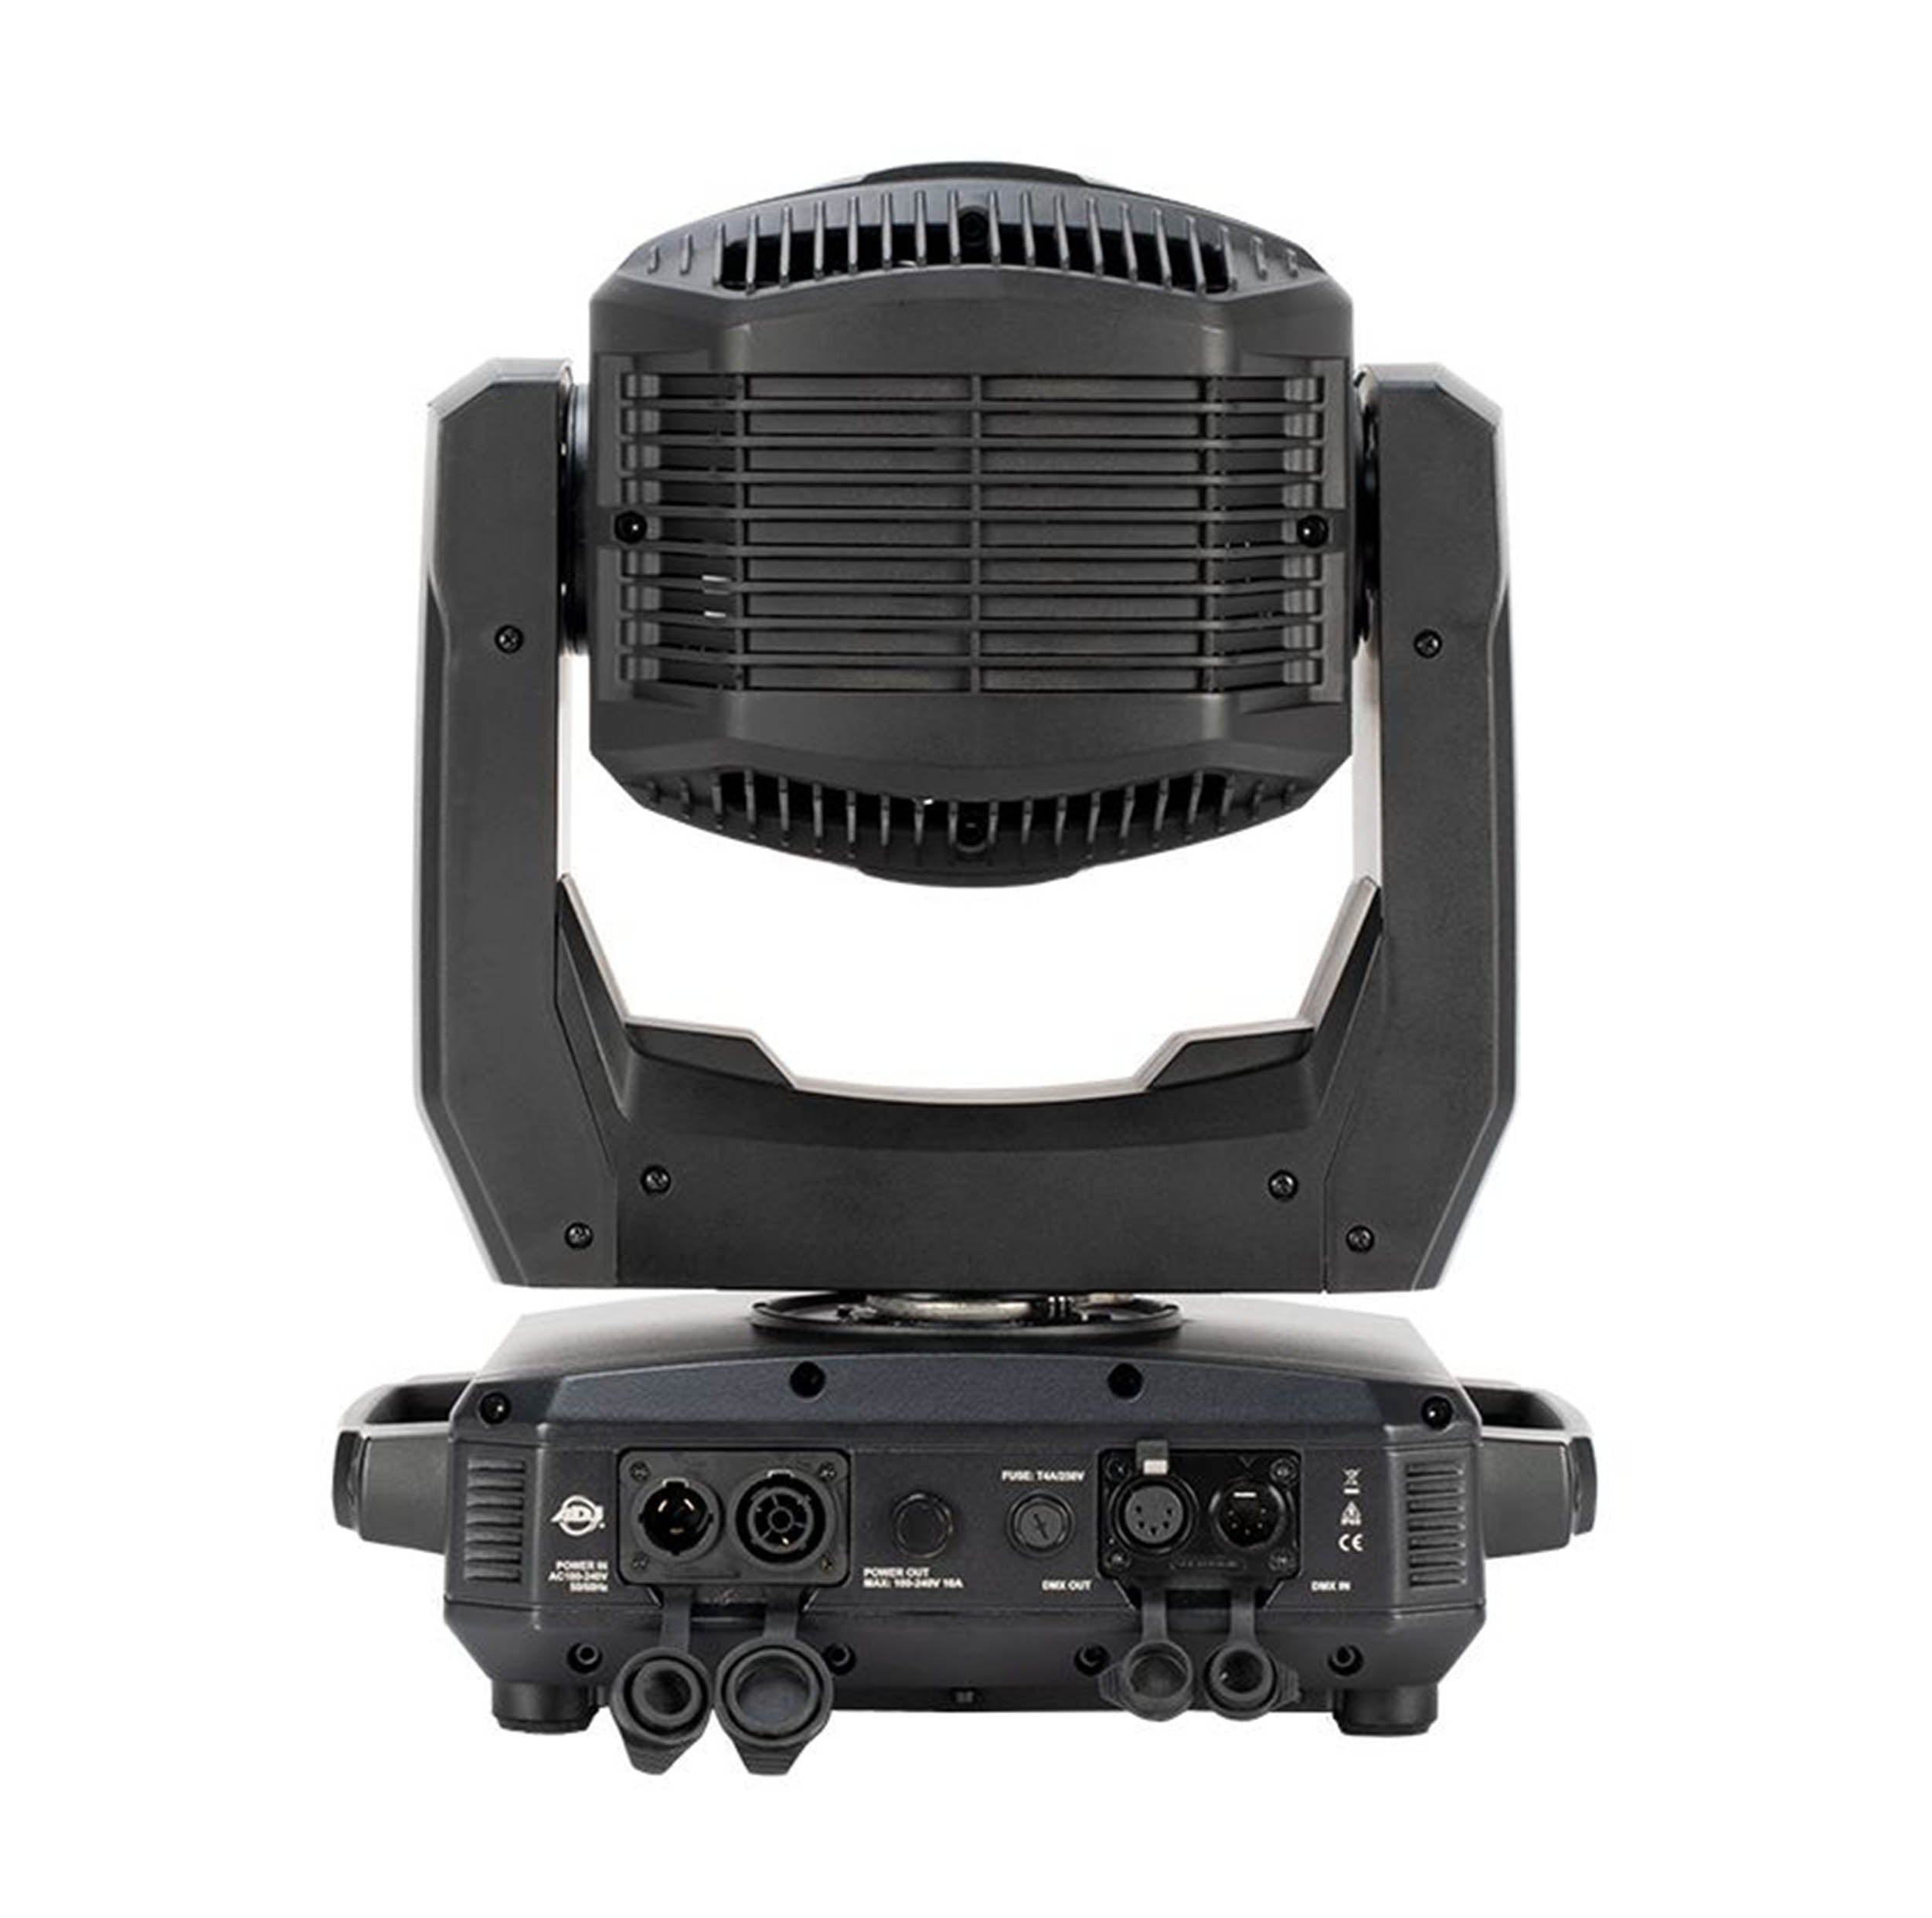 ADJ Hydro Spot 1, IP65-Rated LED-Powered Moving Head Spot Luminaire with 200-Watt Cool White LED Engine by ADJ